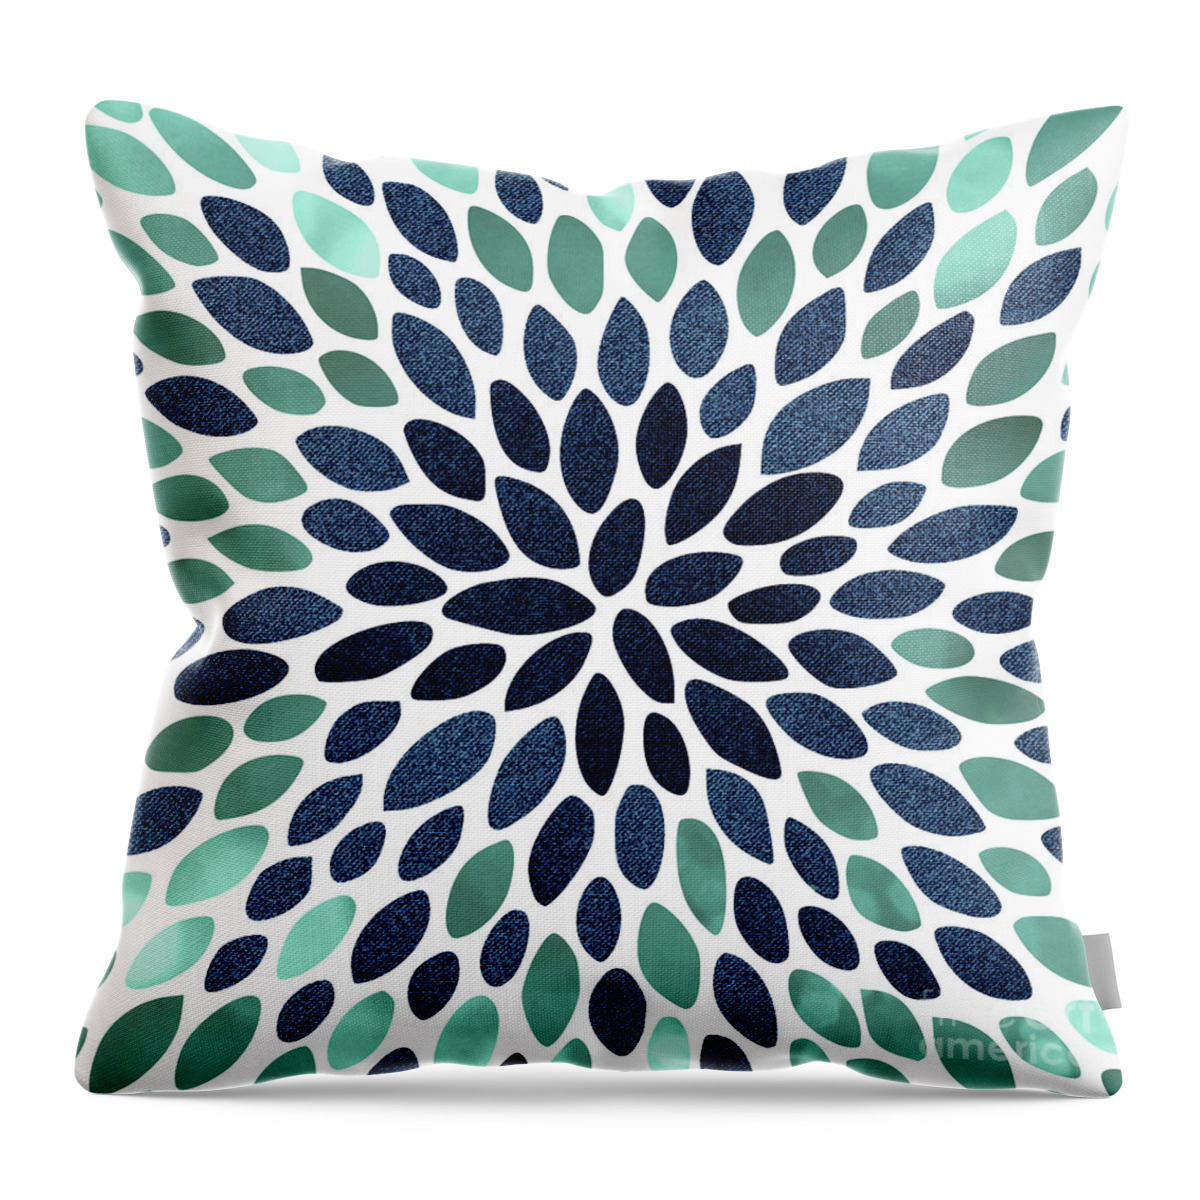 Floral Prints Navy Blue and Grey by Megan Morris on Rectangular Pillow Society6 Abstract 